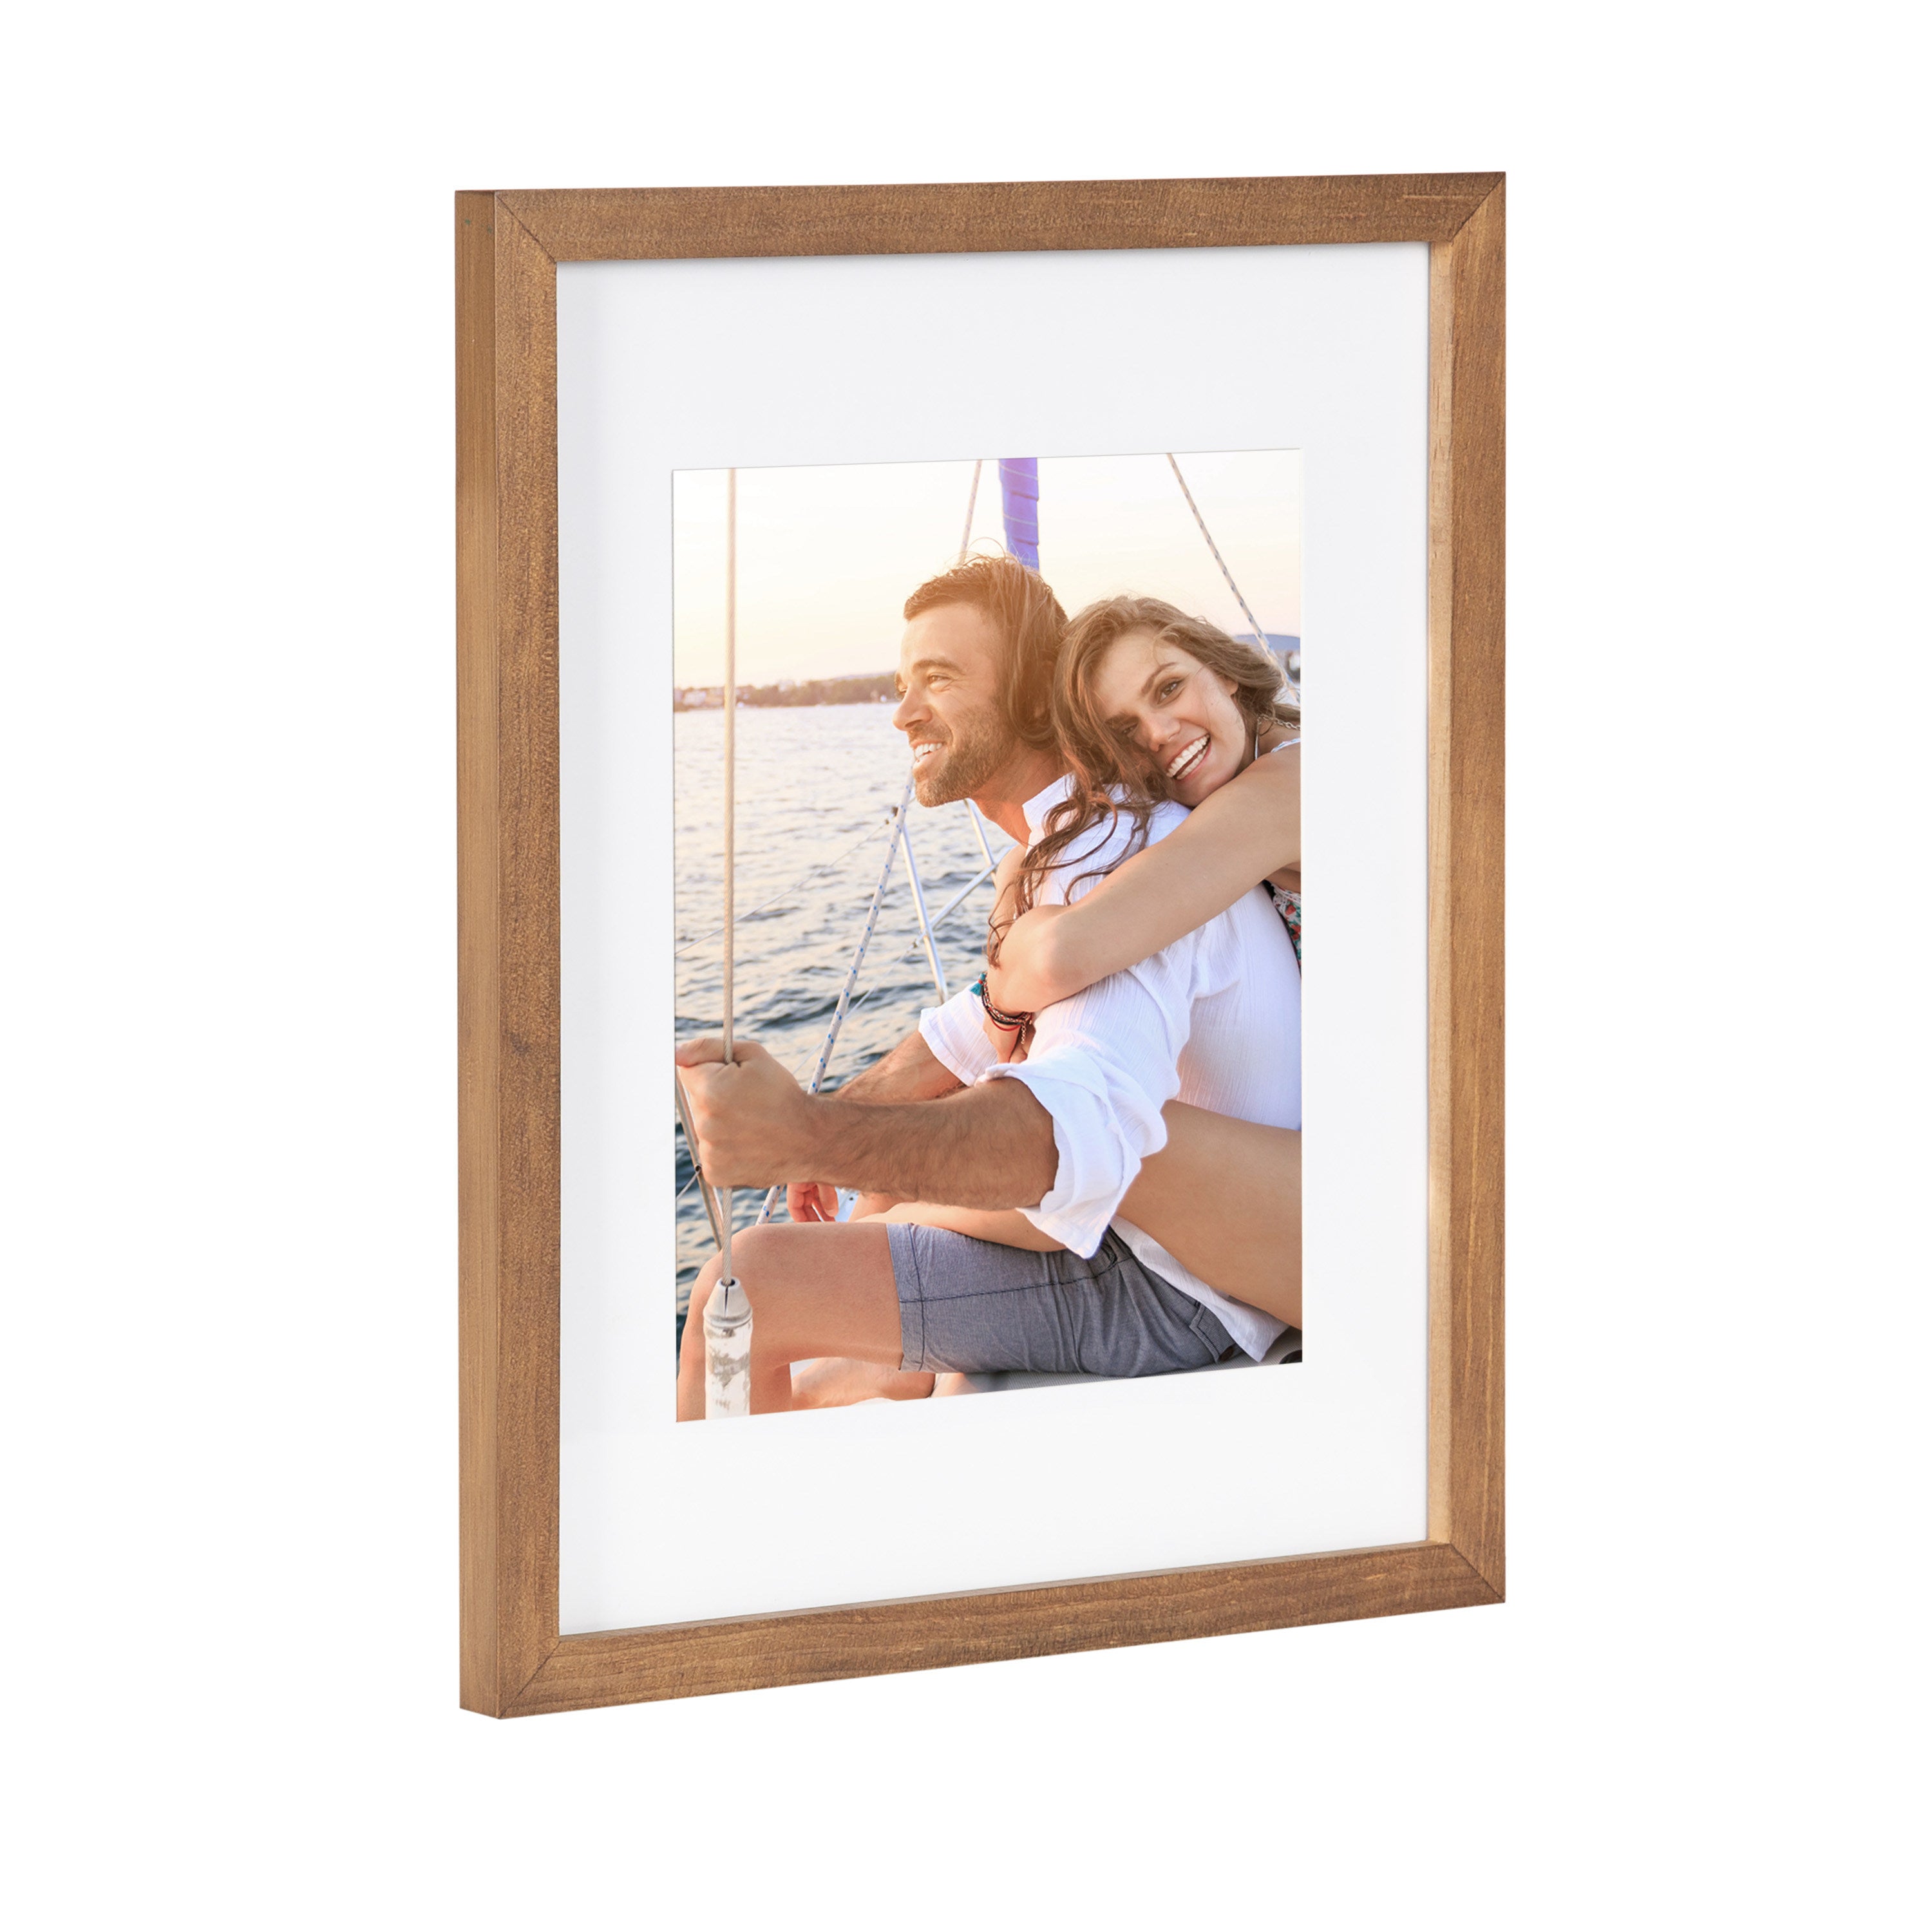 Gallery Wall Frame And Shelf Kit